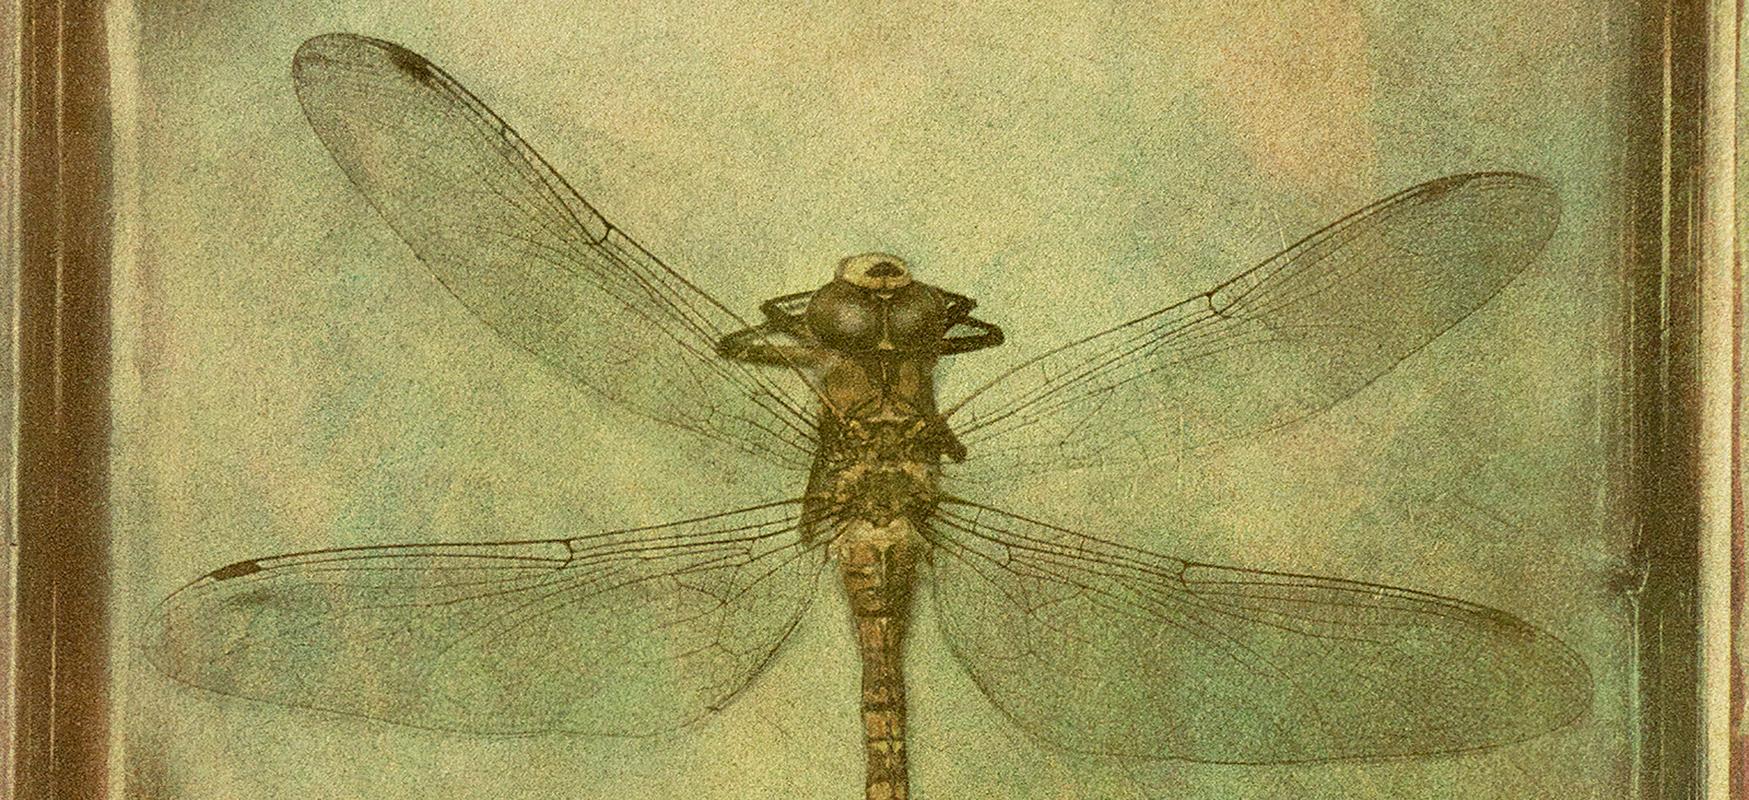 Dragonfly- Signed limited edition nature print, Color photo, insect, Yellow  - Photograph by Ian Sanderson